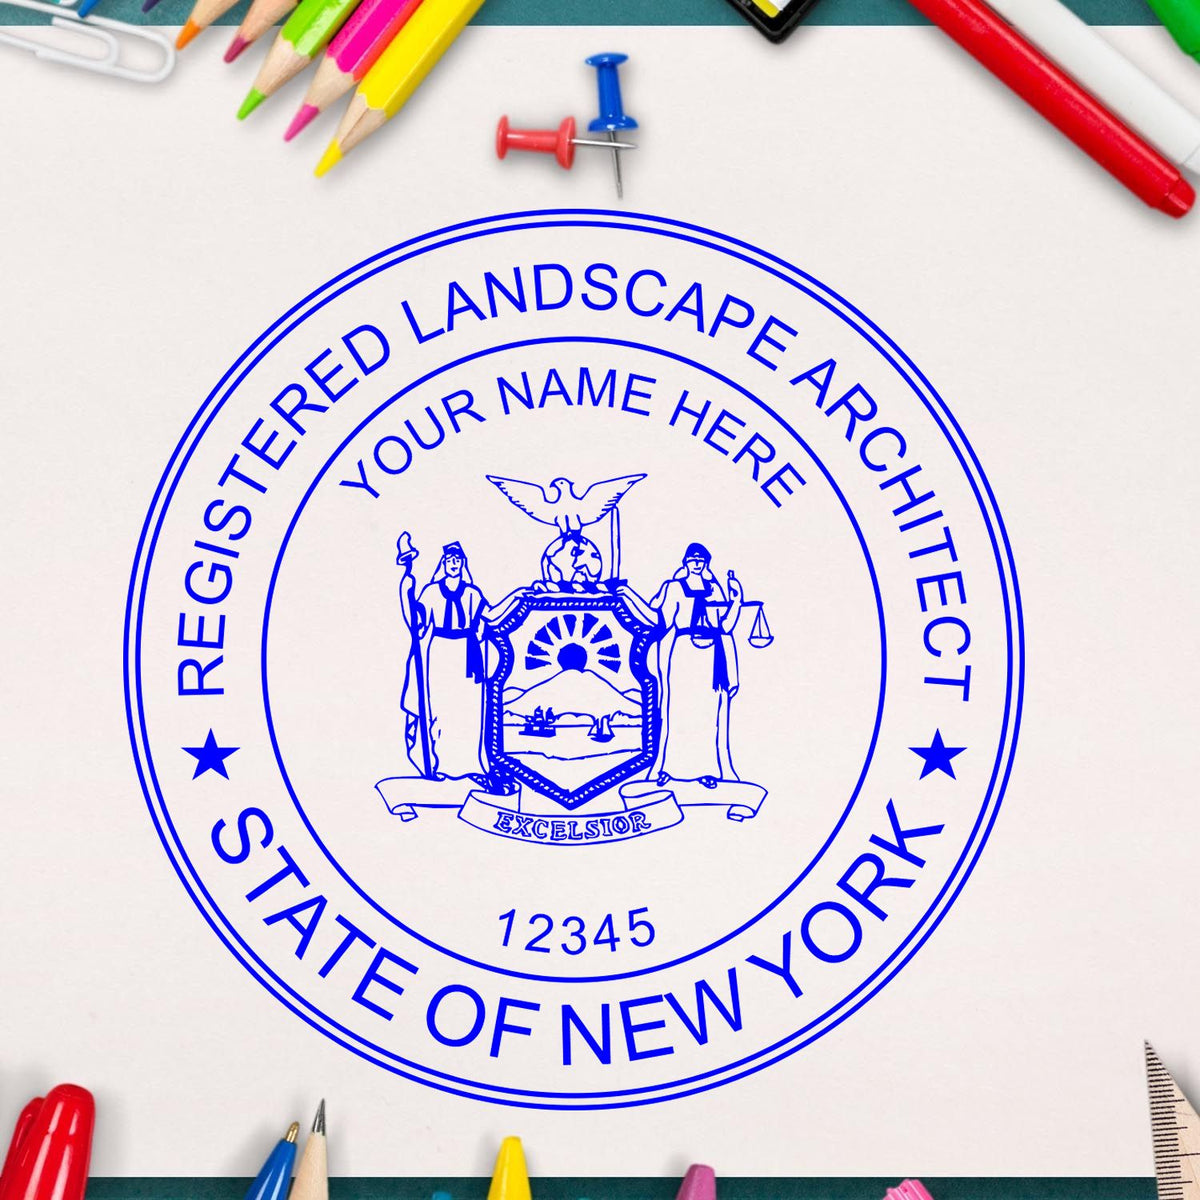 This paper is stamped with a sample imprint of the Self-Inking New York Landscape Architect Stamp, signifying its quality and reliability.